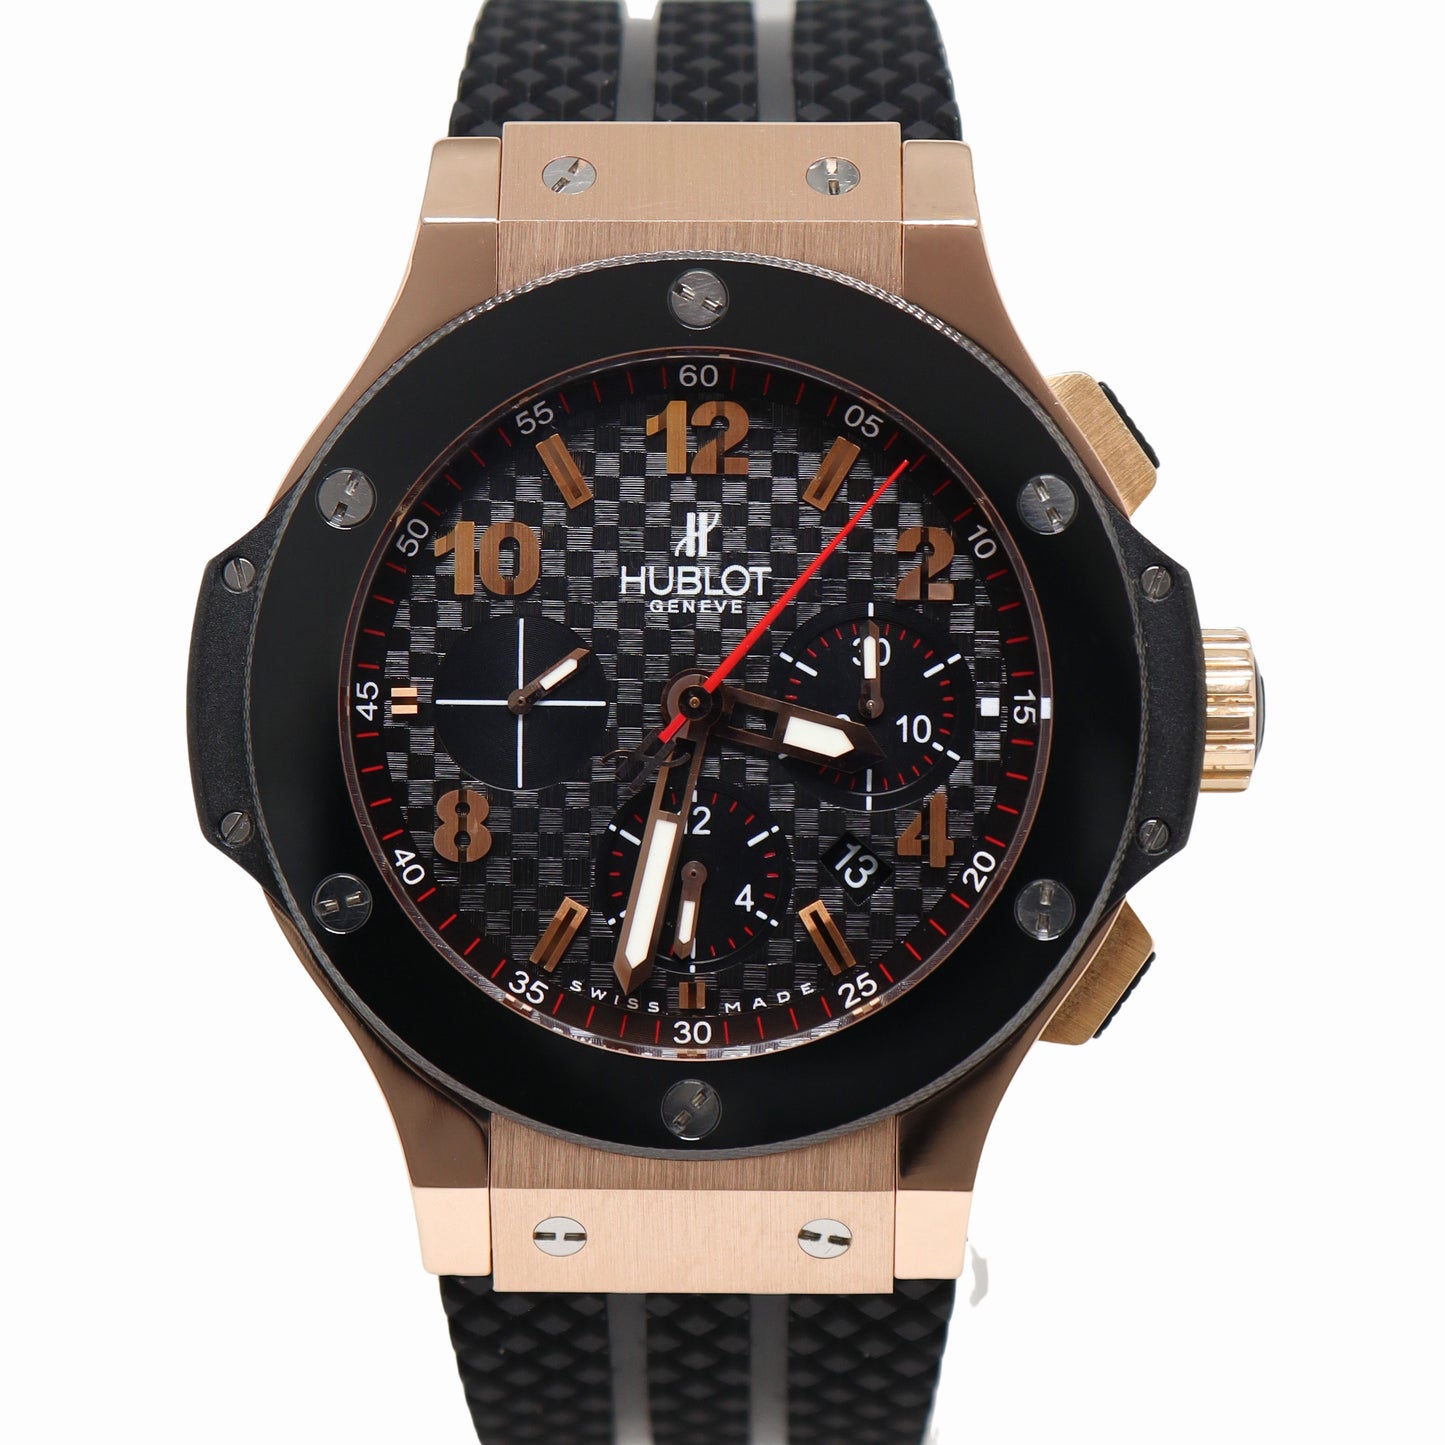 Hublot Big Bang 44mm Rose Gold Black Chronograph Dial Watch Reference# 301.PB.131.RX - Happy Jewelers Fine Jewelry Lifetime Warranty